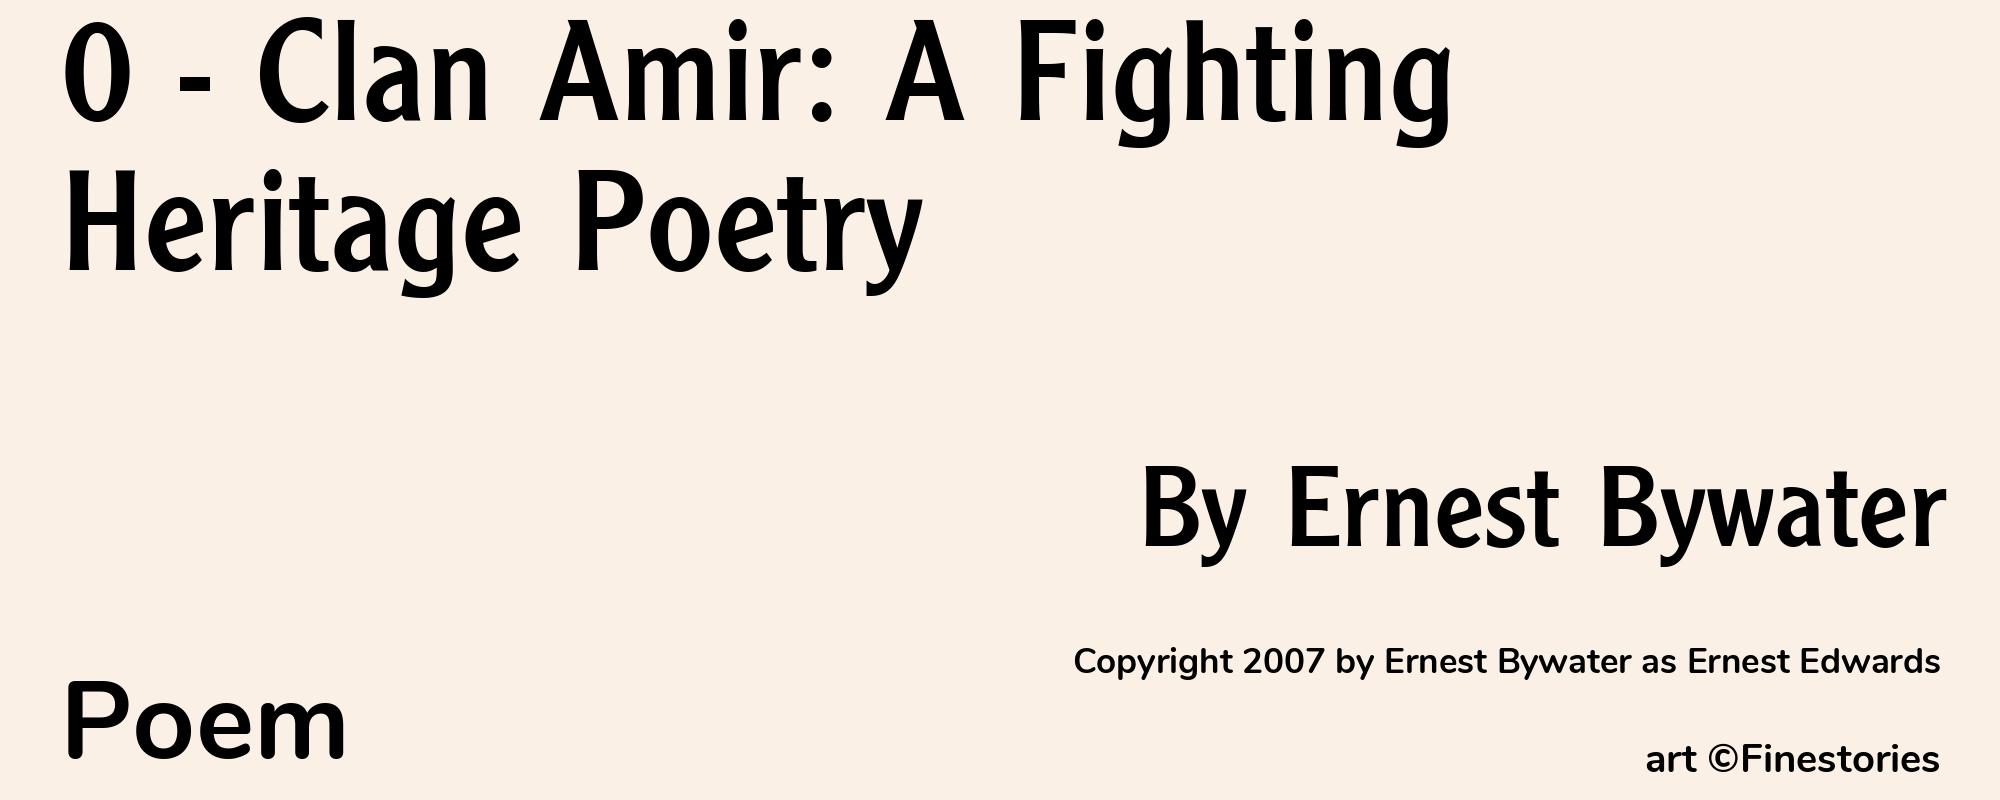 0 - Clan Amir: A Fighting Heritage Poetry - Cover